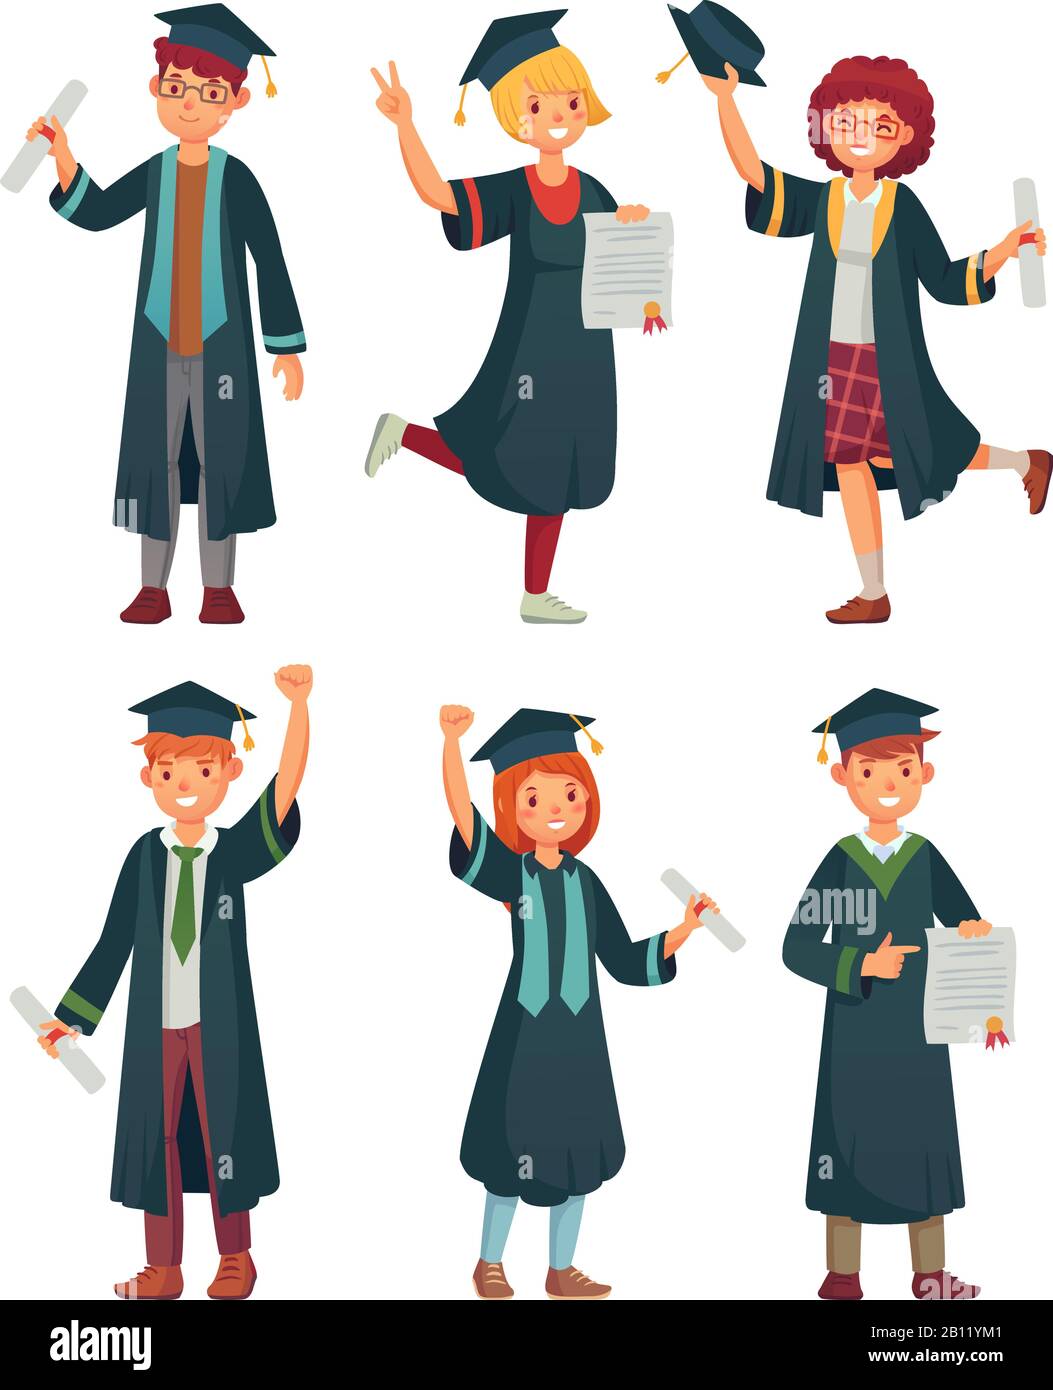 Graduates students. College student in graduation gowns, educated university graduating man and woman characters cartoon vector set Stock Vector